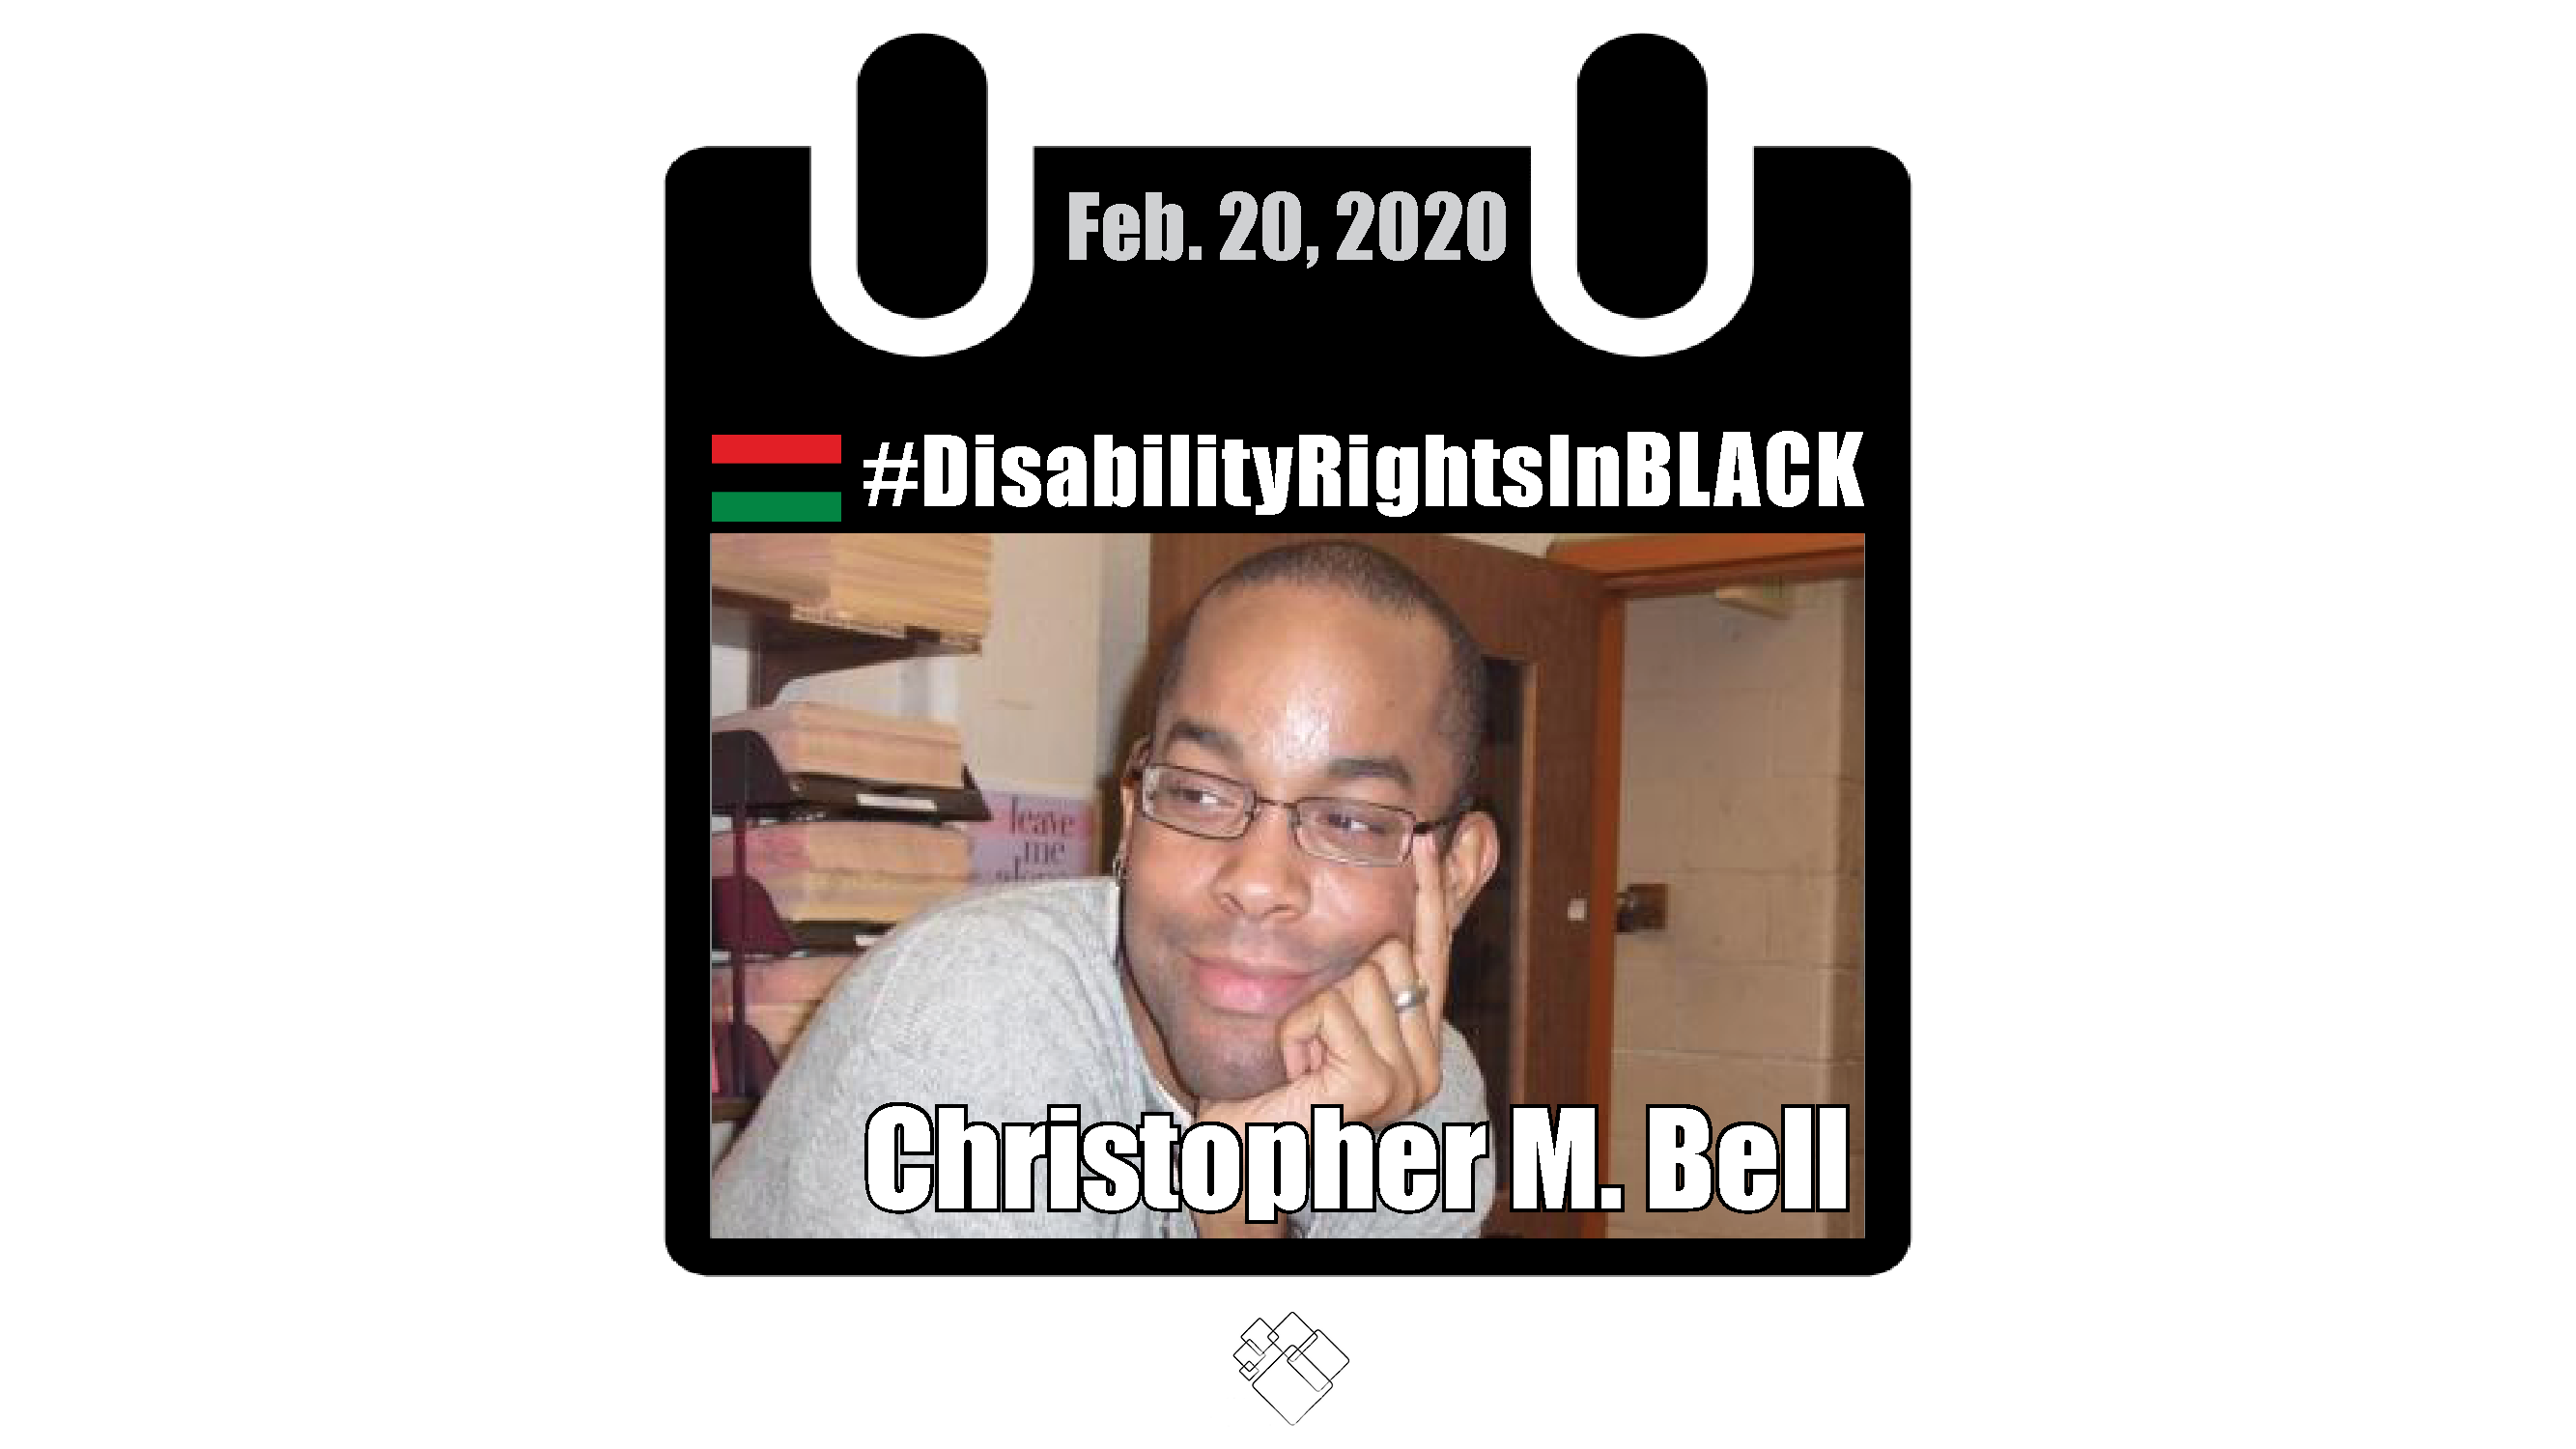 Christopher M. Bell, an African American man in his late 20s-early 30s in a gray sweatshirt. The image of him has the Disability Rights in Black calendar style frame graphic with the hashtag for the series at the top and the date, February 20, 2020.